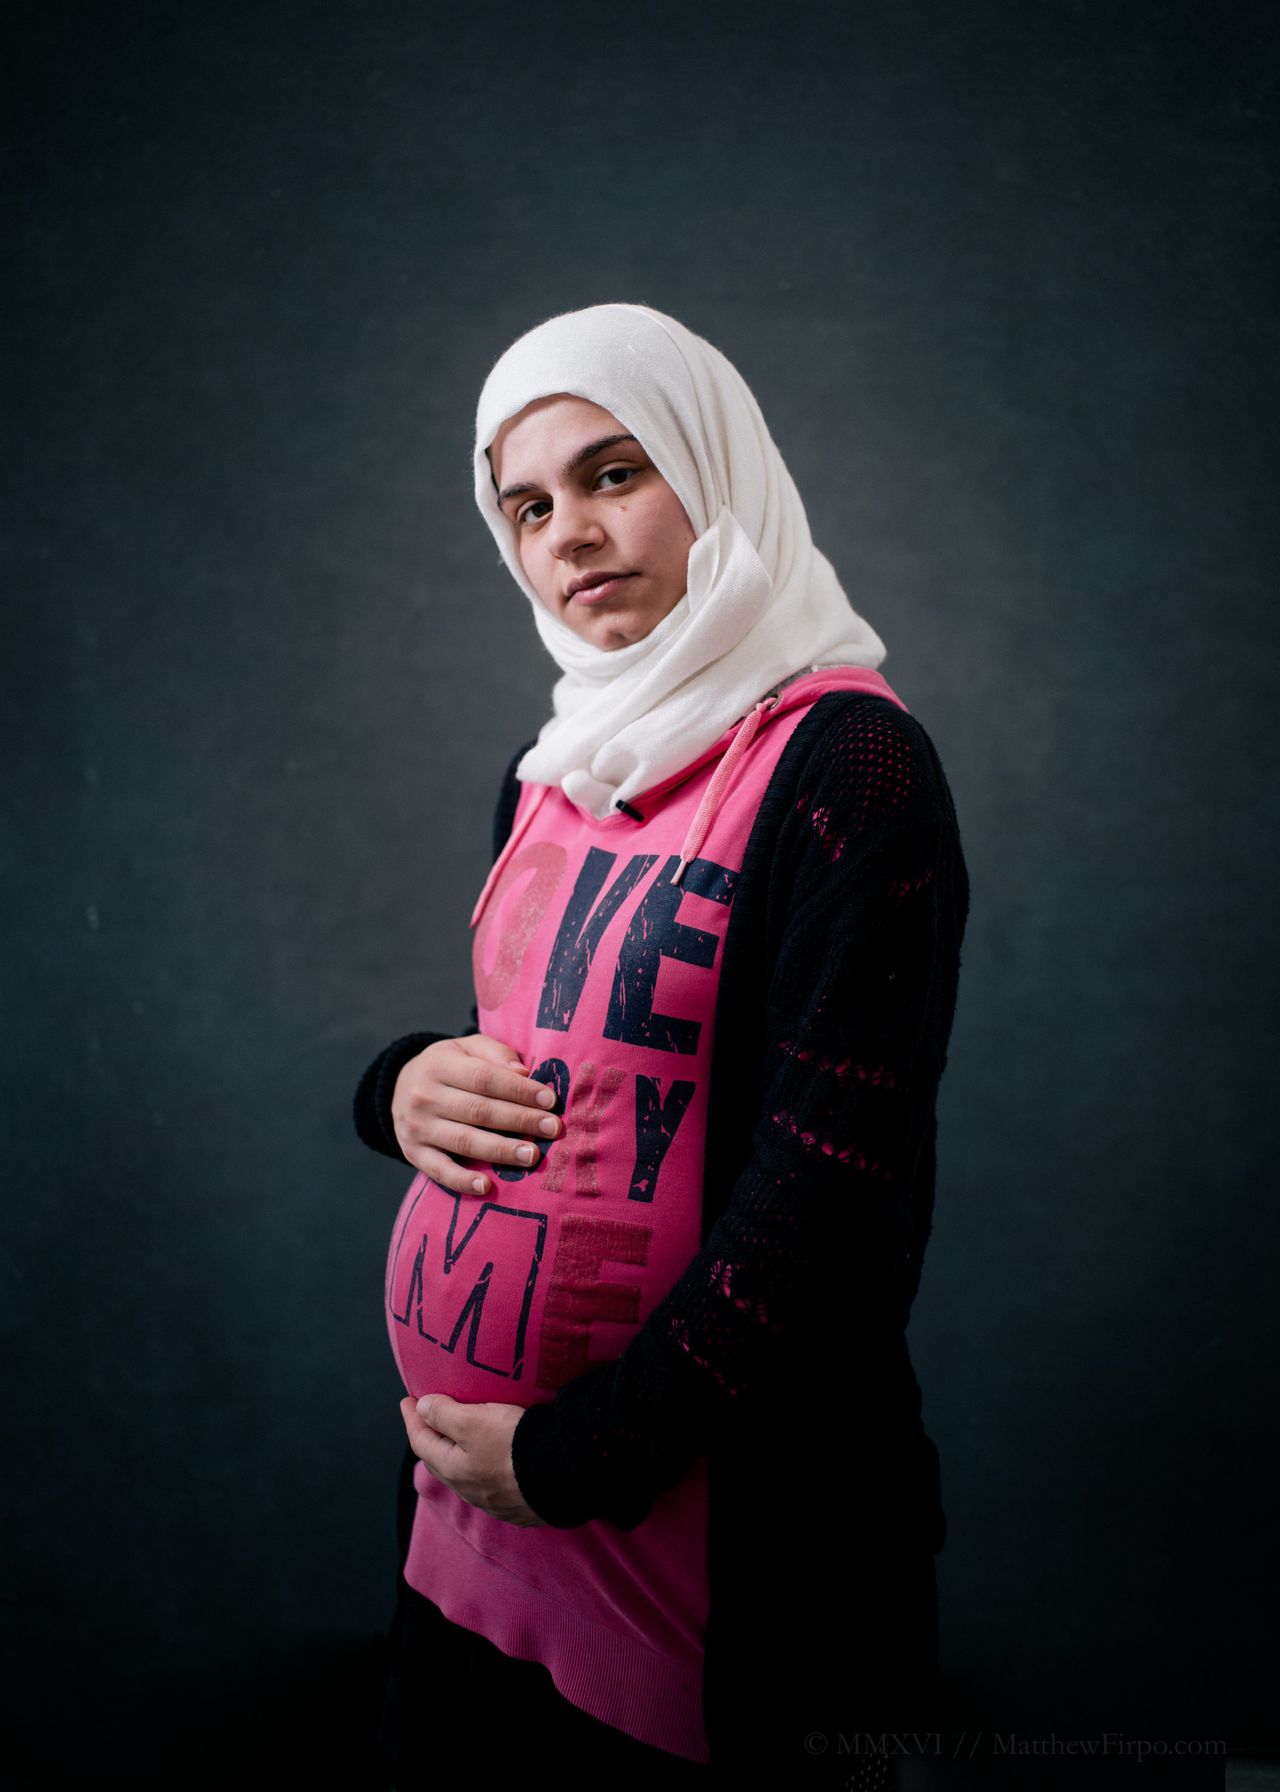 Reem, 21, was nine months pregnant when the interview was shot. After months living in Turkey, her husband was accused of being a smuggler when he attempted the crossing into Europe. All she wanted, she said, was to have her husband back before her baby was born.